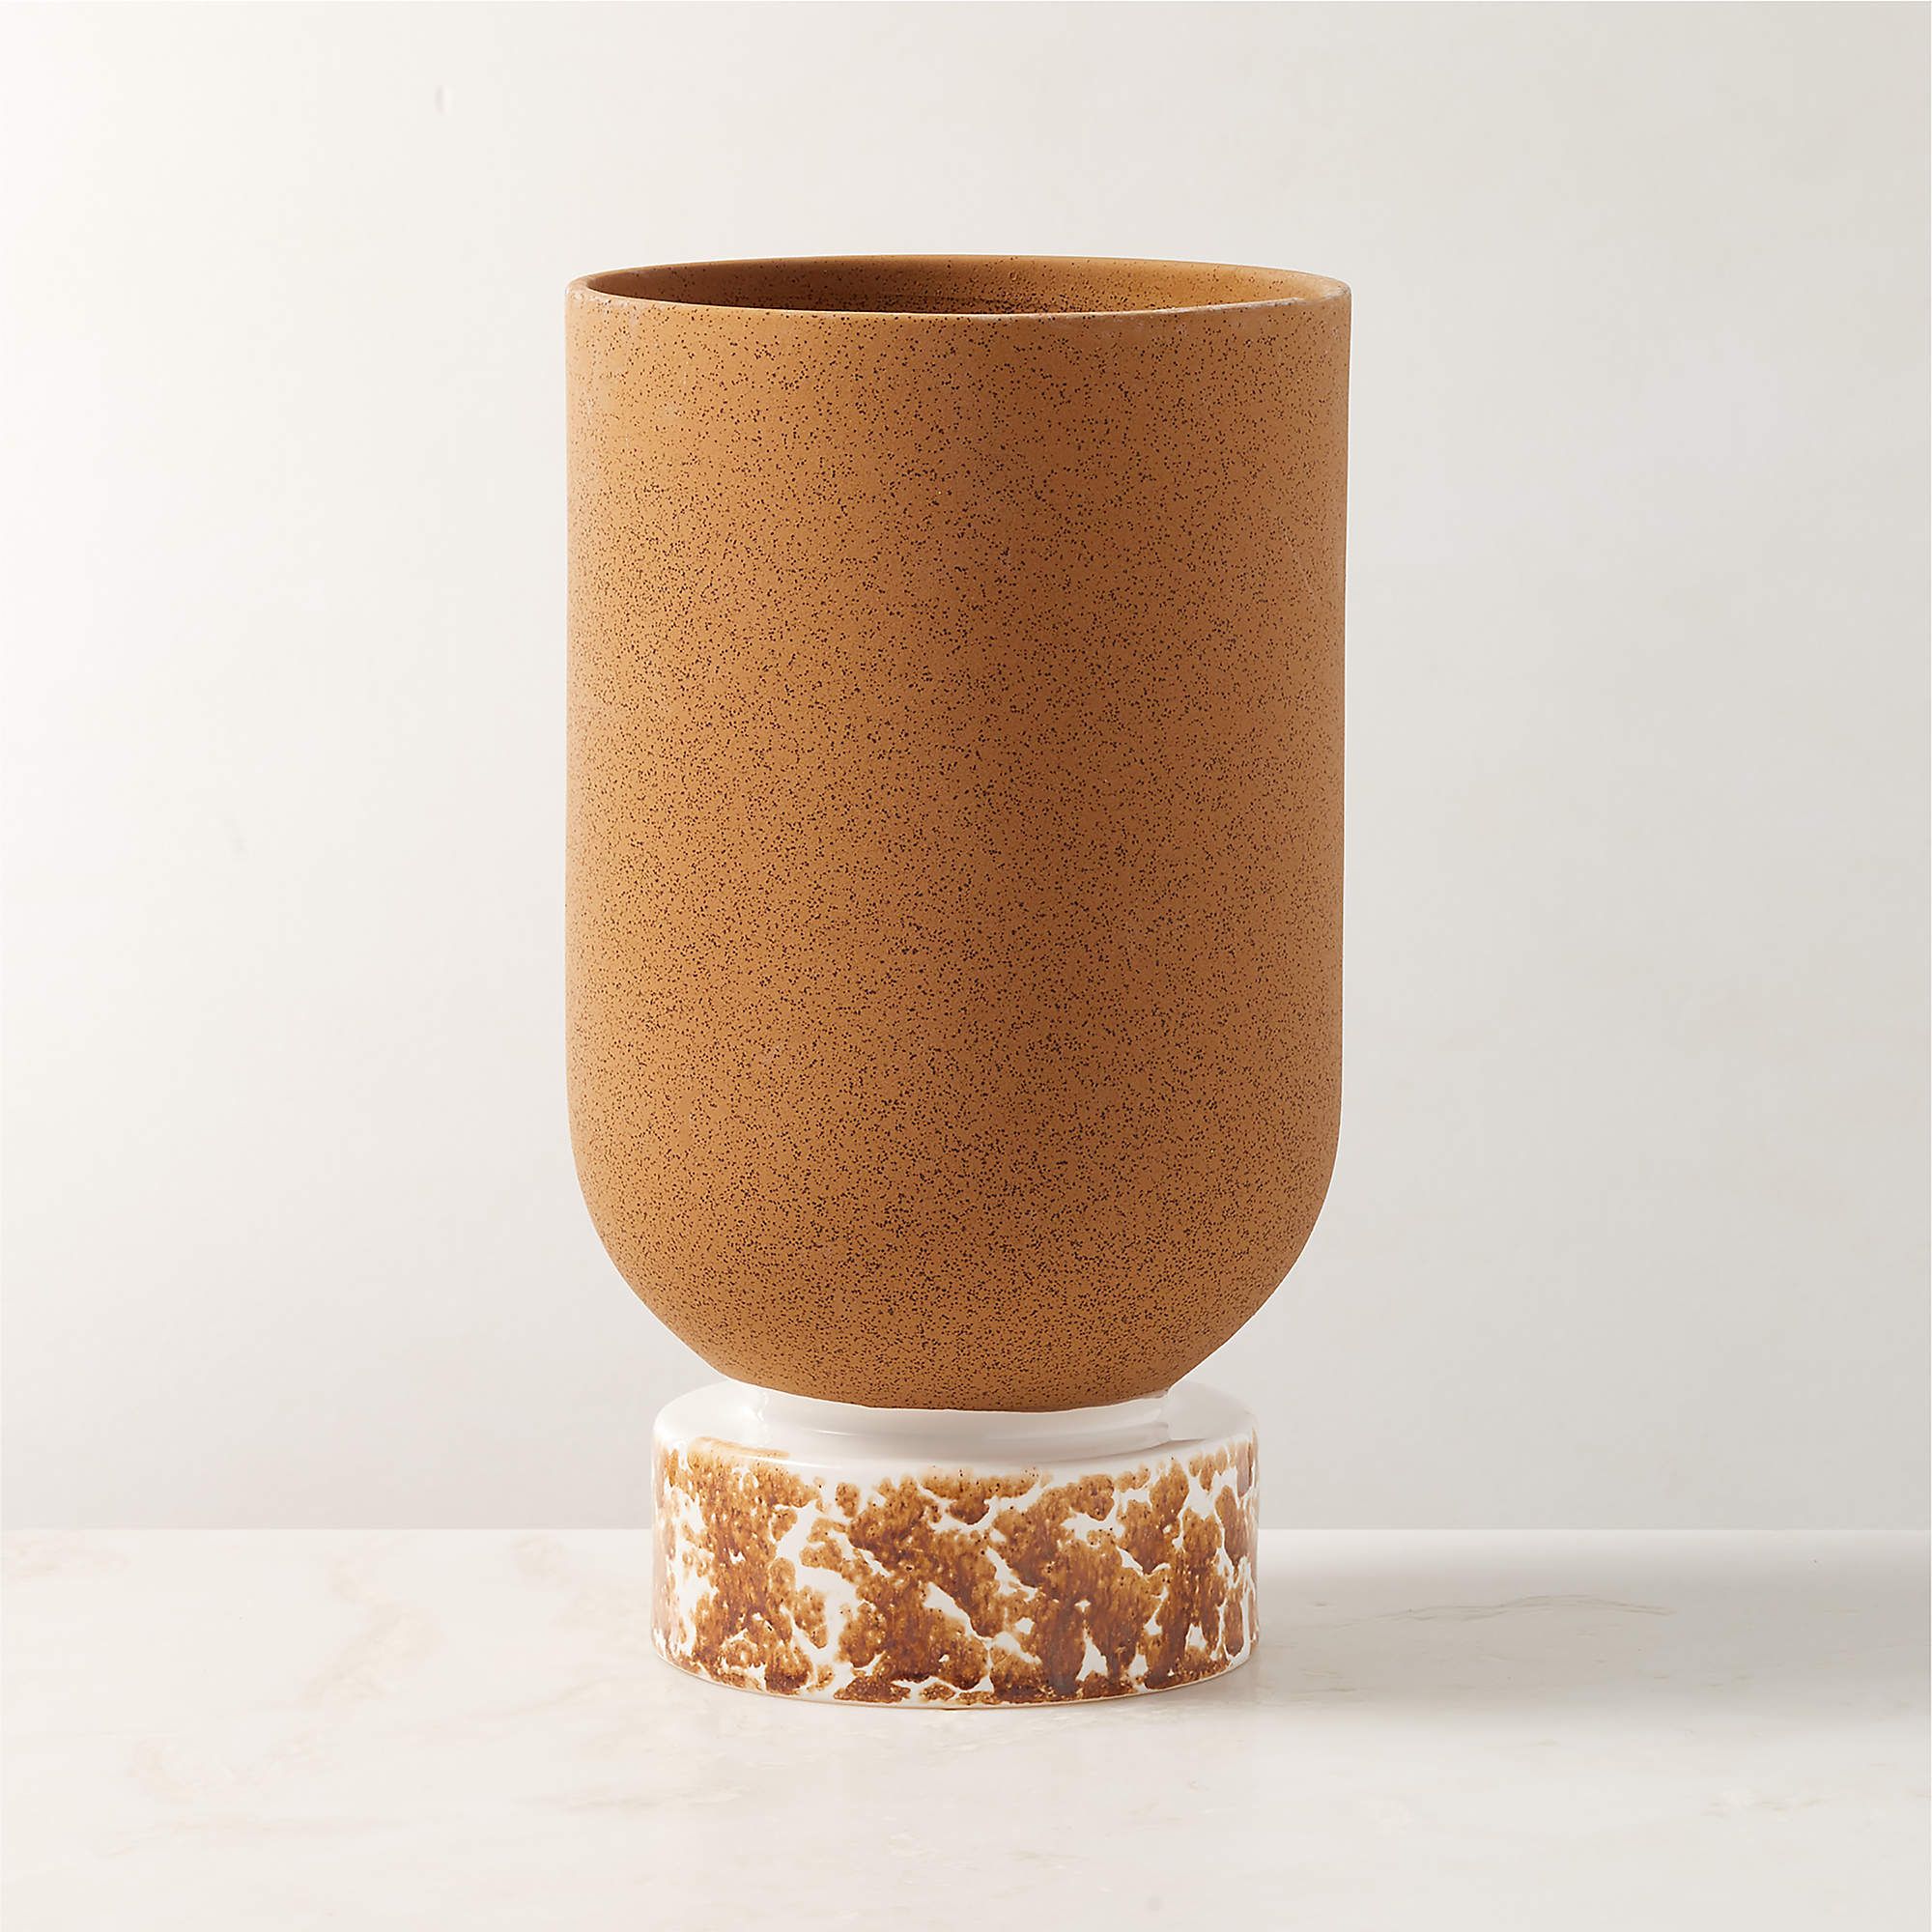 Descanso Brown and White Planter + Reviews | CB2 | CB2